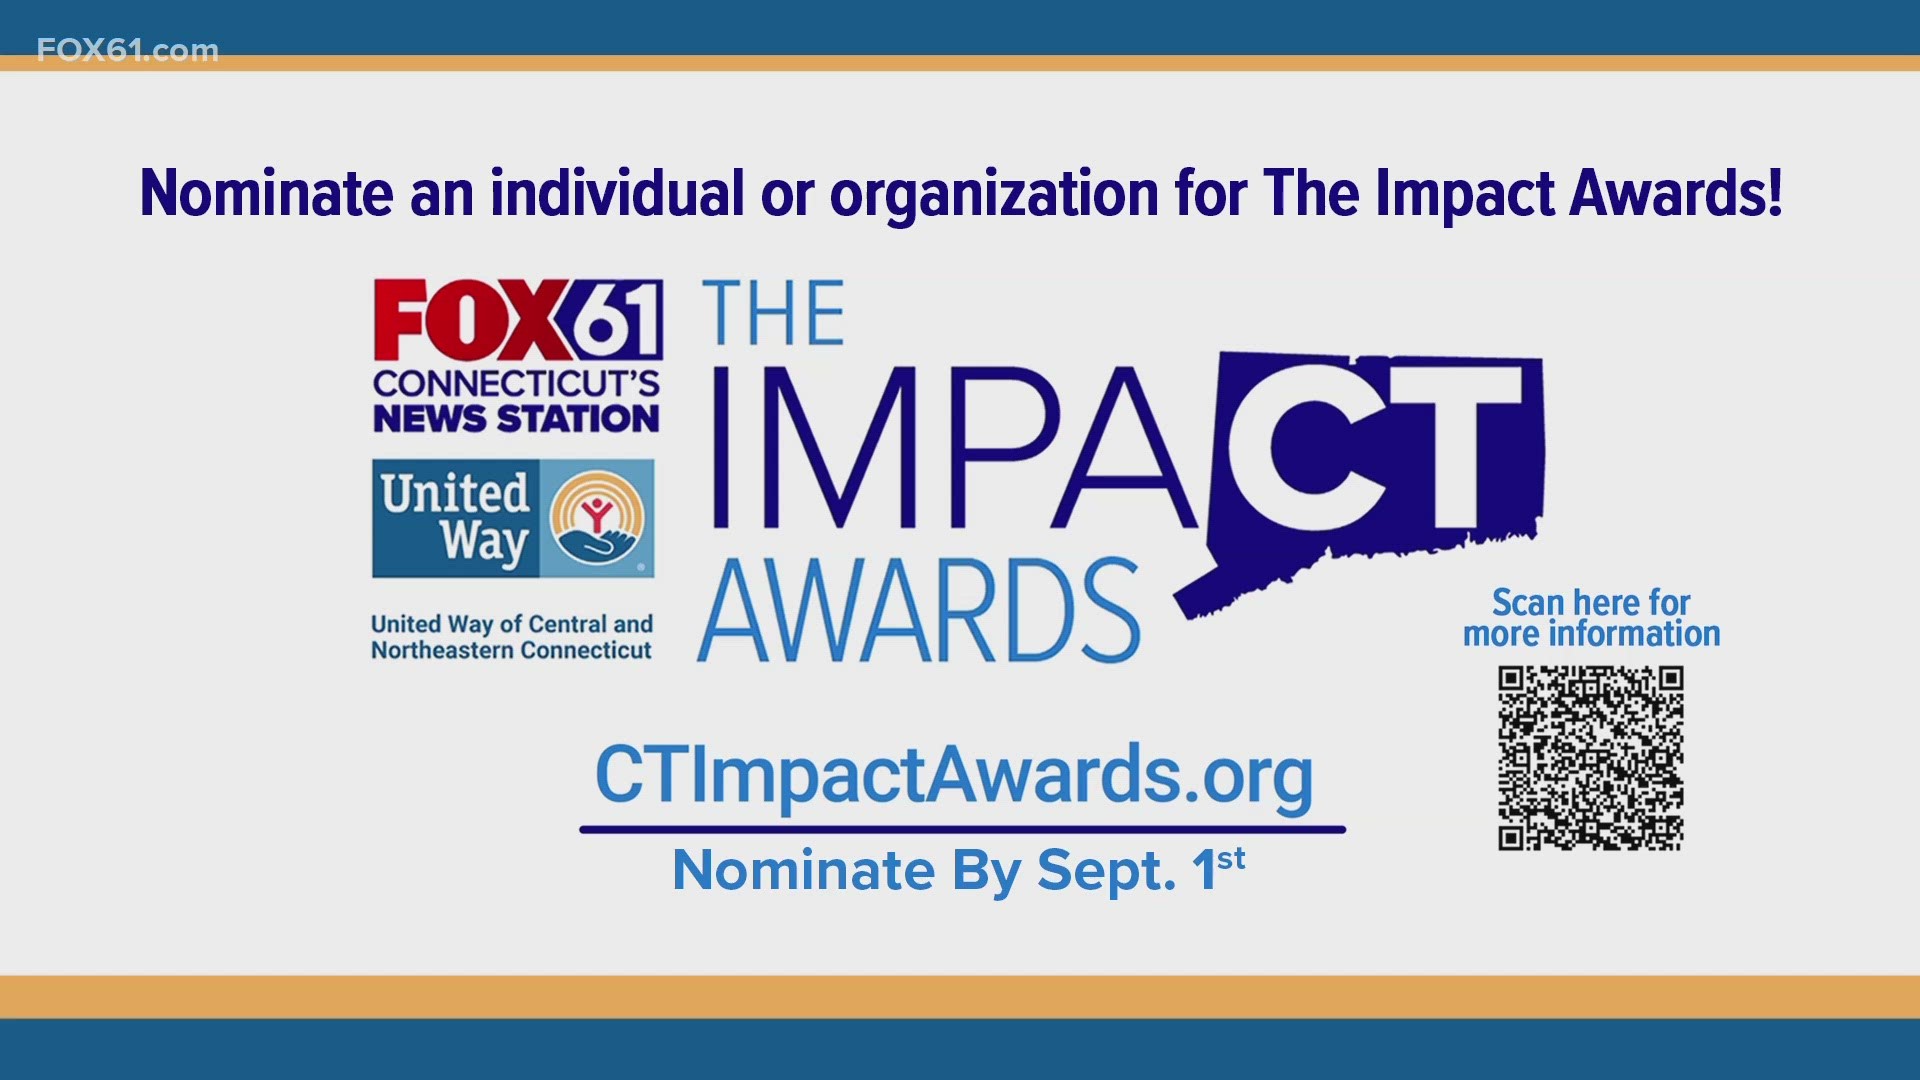 The Impact Awards aims to raise awareness and resources to benefit the well-being of children, adults, and families in the communities where we live and work.